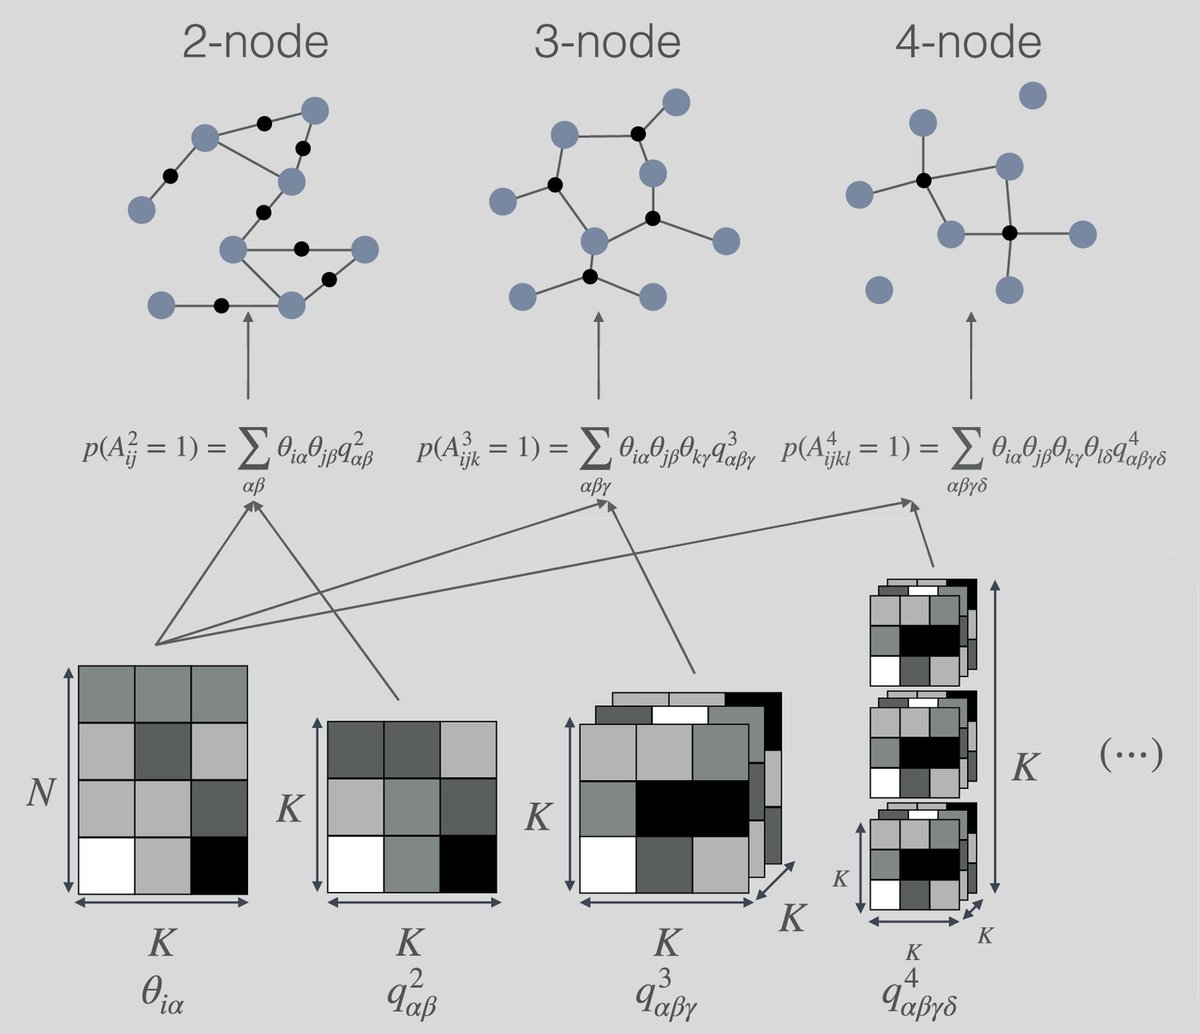 New paper out in @PNASNews! Hyperedge prediction and the statistical mechanisms of higher-order and lower-order interactions in complex networks pnas.org/doi/10.1073/pn… A short thread with the main ideas 👇🏽